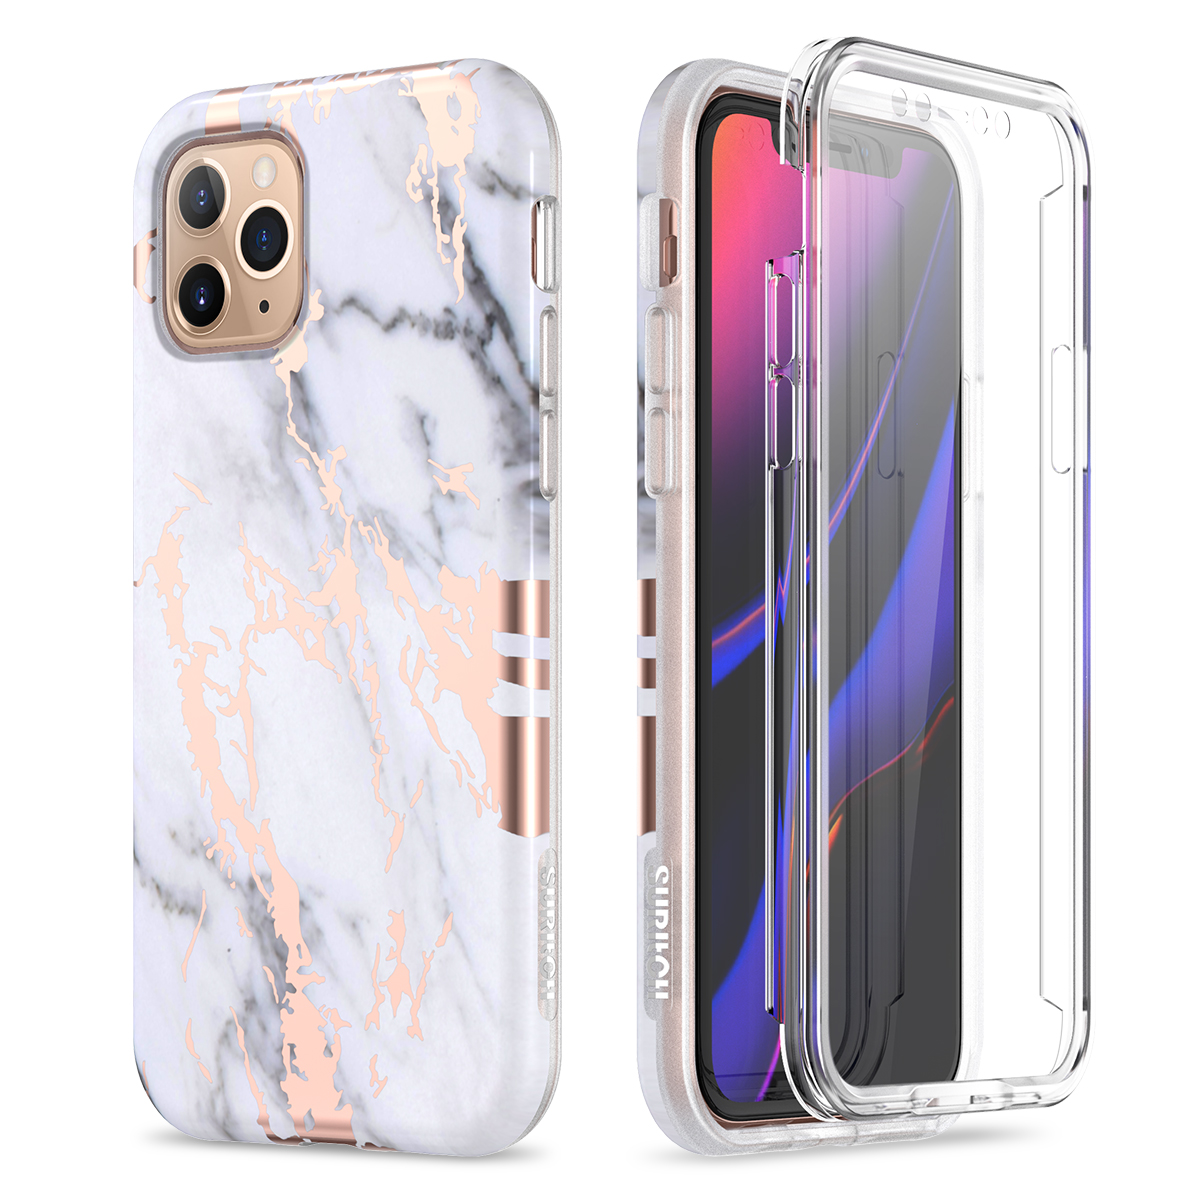 Case for iPhone 11 6.1 Inch,Aulzaju iPhone 11 Bling Marble Hard Case Slim Stylish Shockproof Cover for iPhone 11 Hybrid Silicone Plating Case-Green